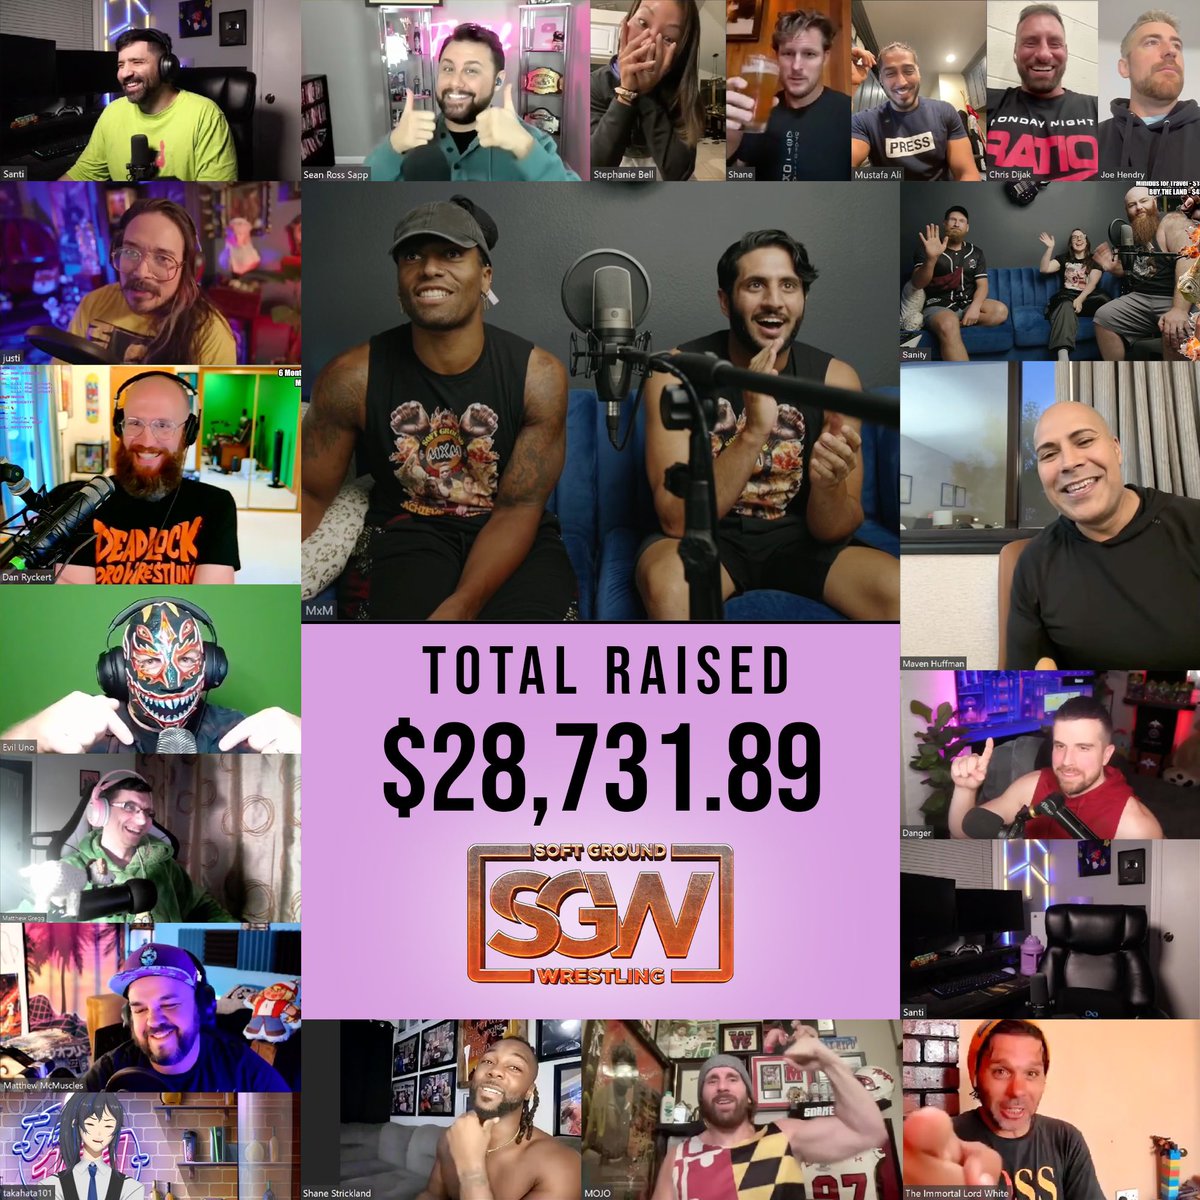 Incredibly excited to announce we have raised $28,731.89 for @SGWug thanks to all of your generous support! We couldn’t have done this without all our wonderful friends who joined us for the fundraiser. Thank you to all who participated and donated. ACHIEVE THE DREAM! S-G-DUB!